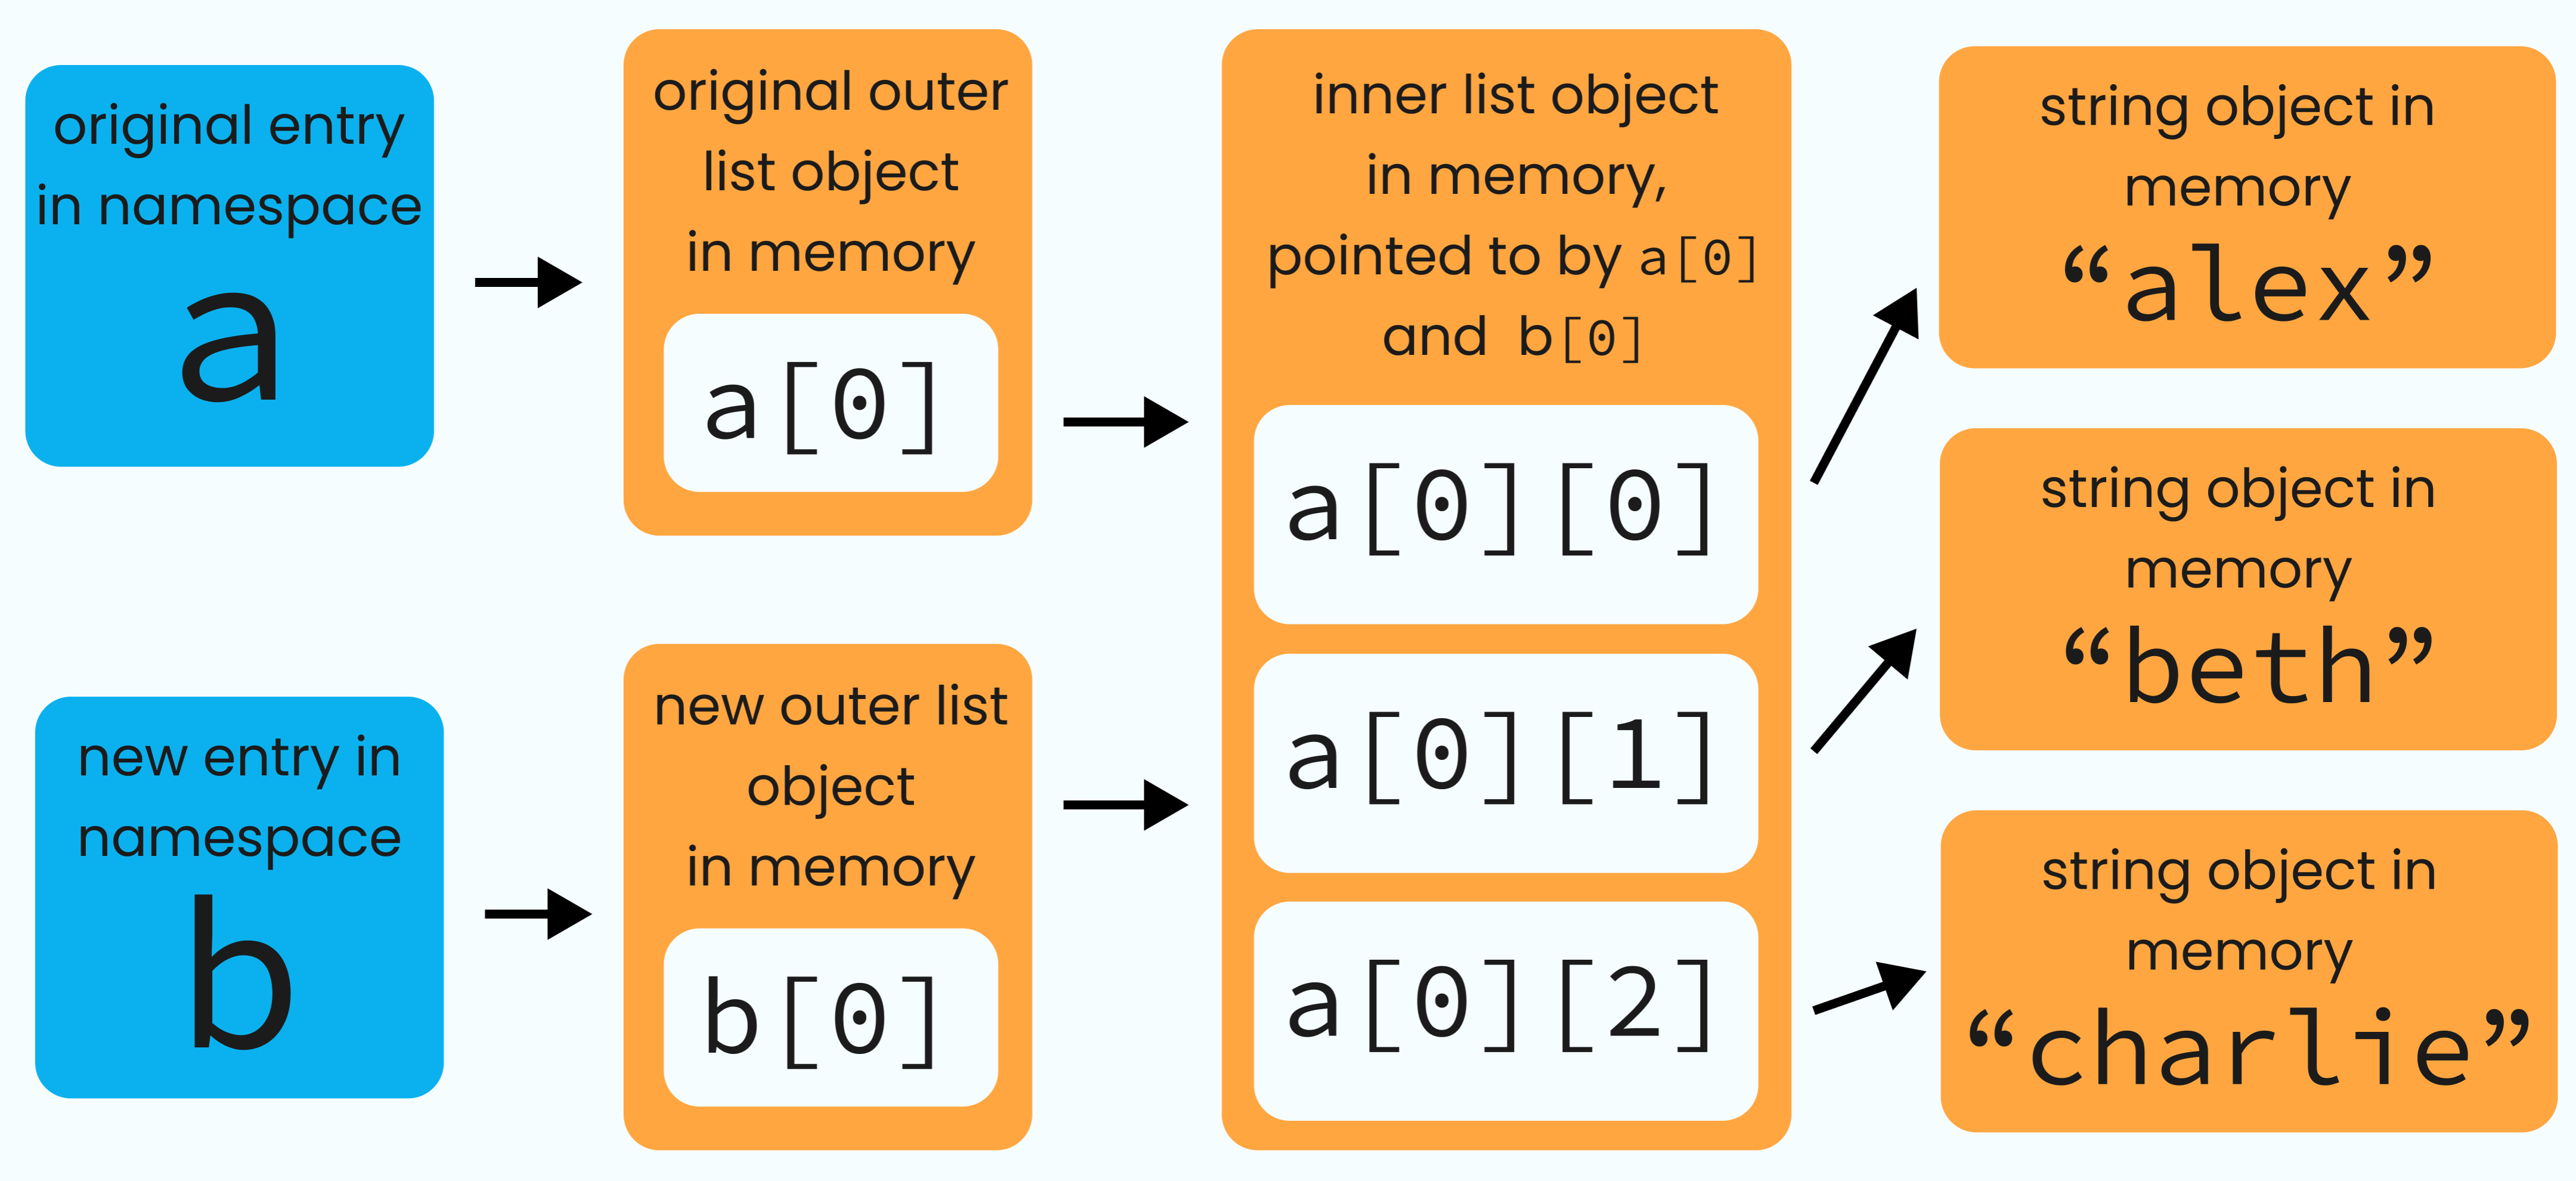 When we use copy, it creates a new outer list object in memory.